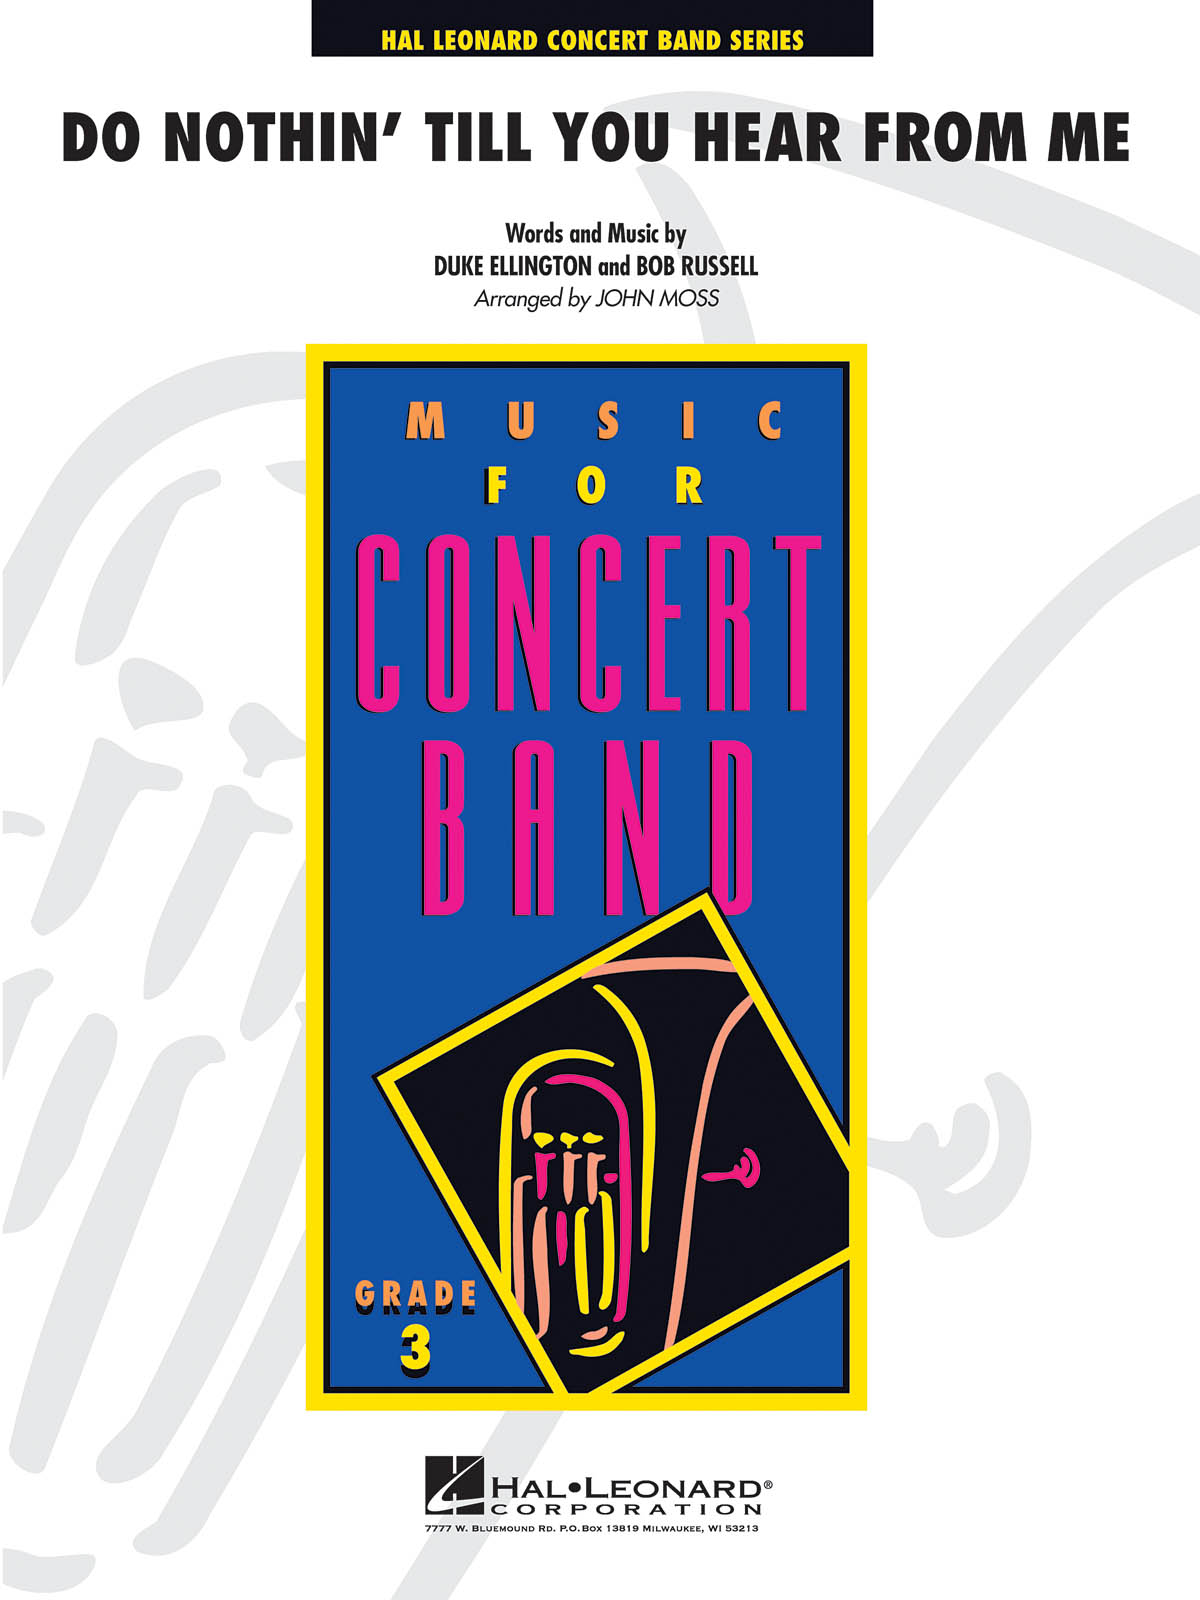 Do nothin' till you hear from me: Concert Band: Score & Parts